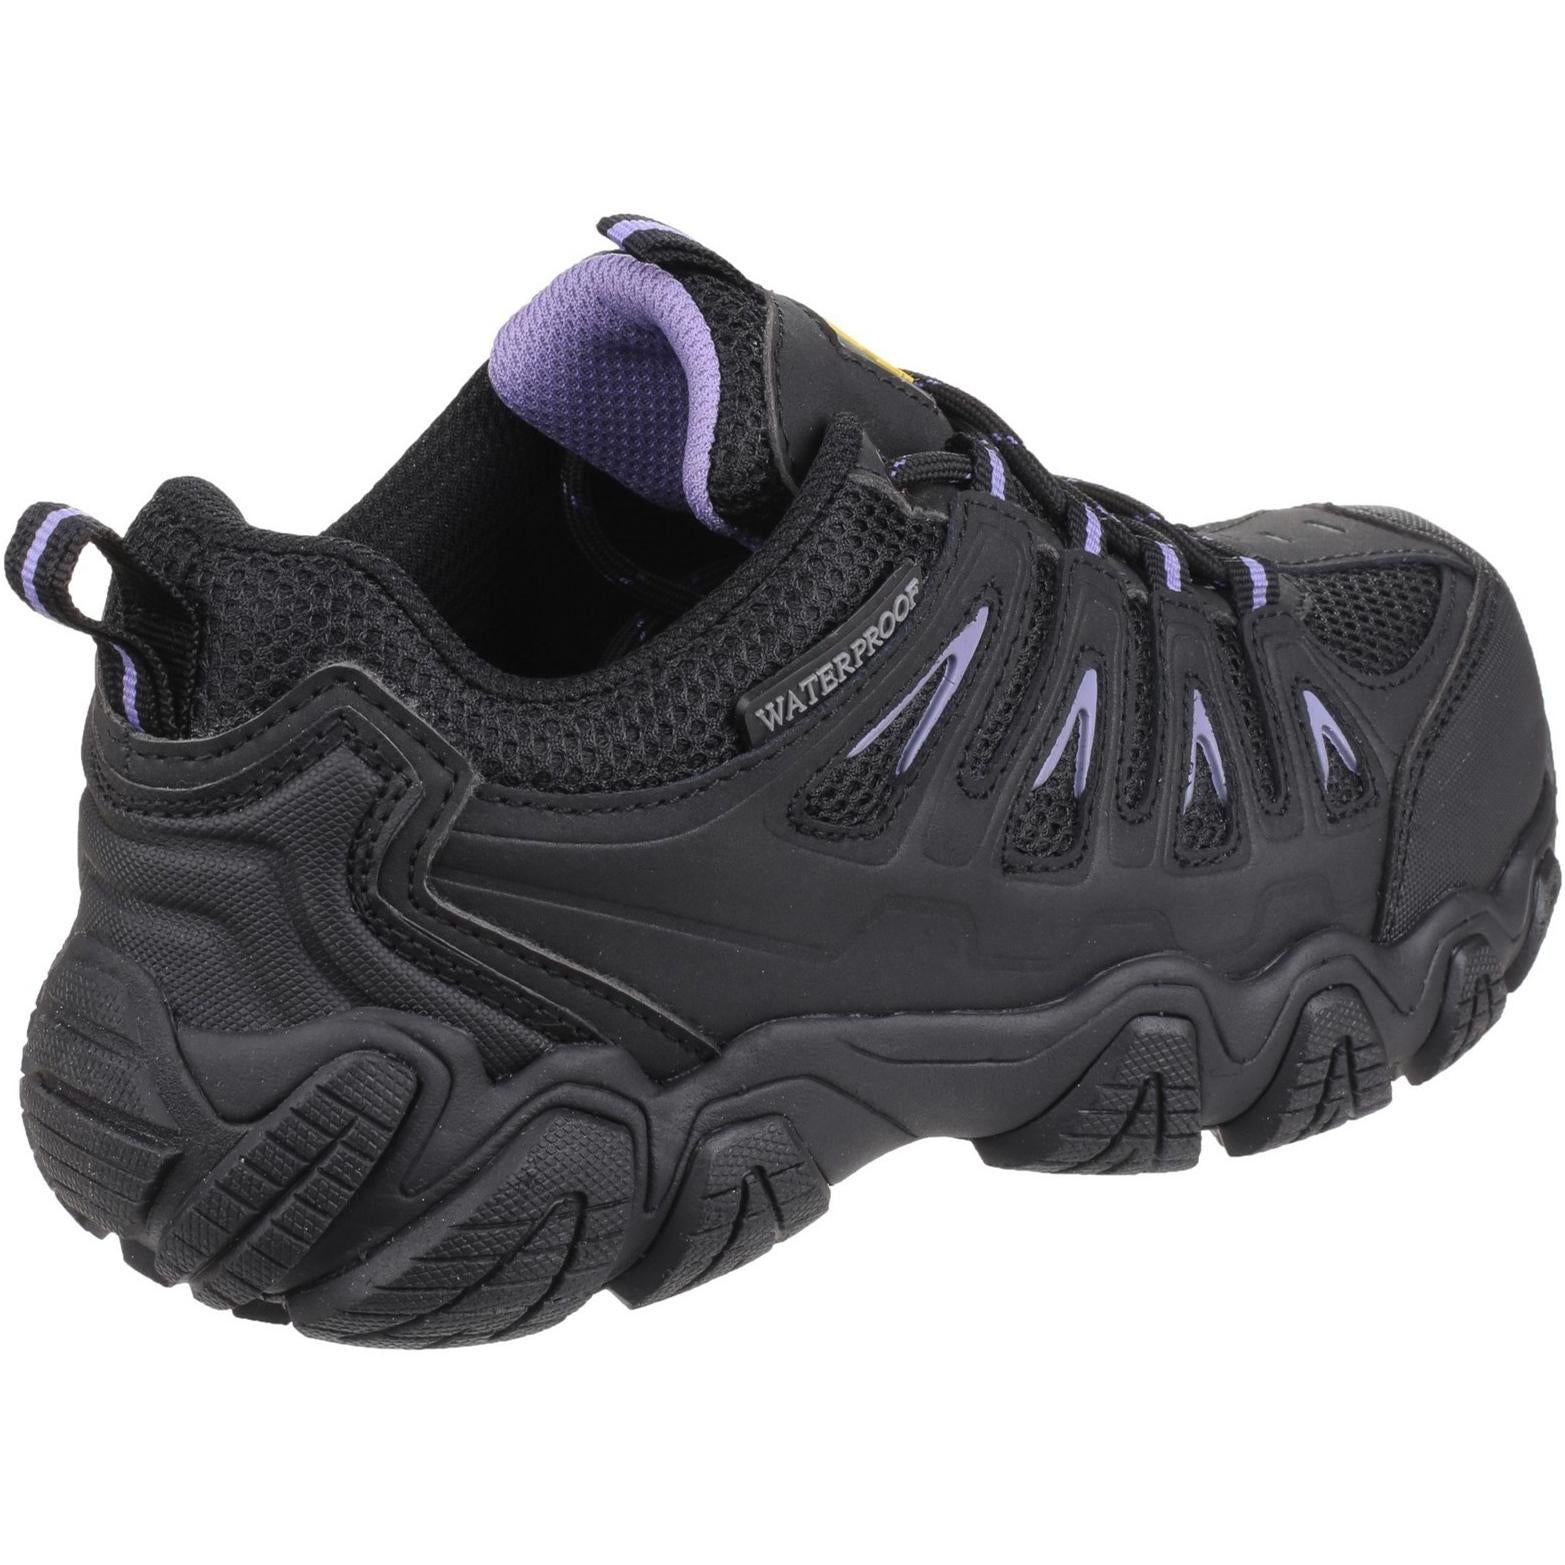 Amblers Safety AS708 Waterproof Non-Metal Ladies Safety Trainer